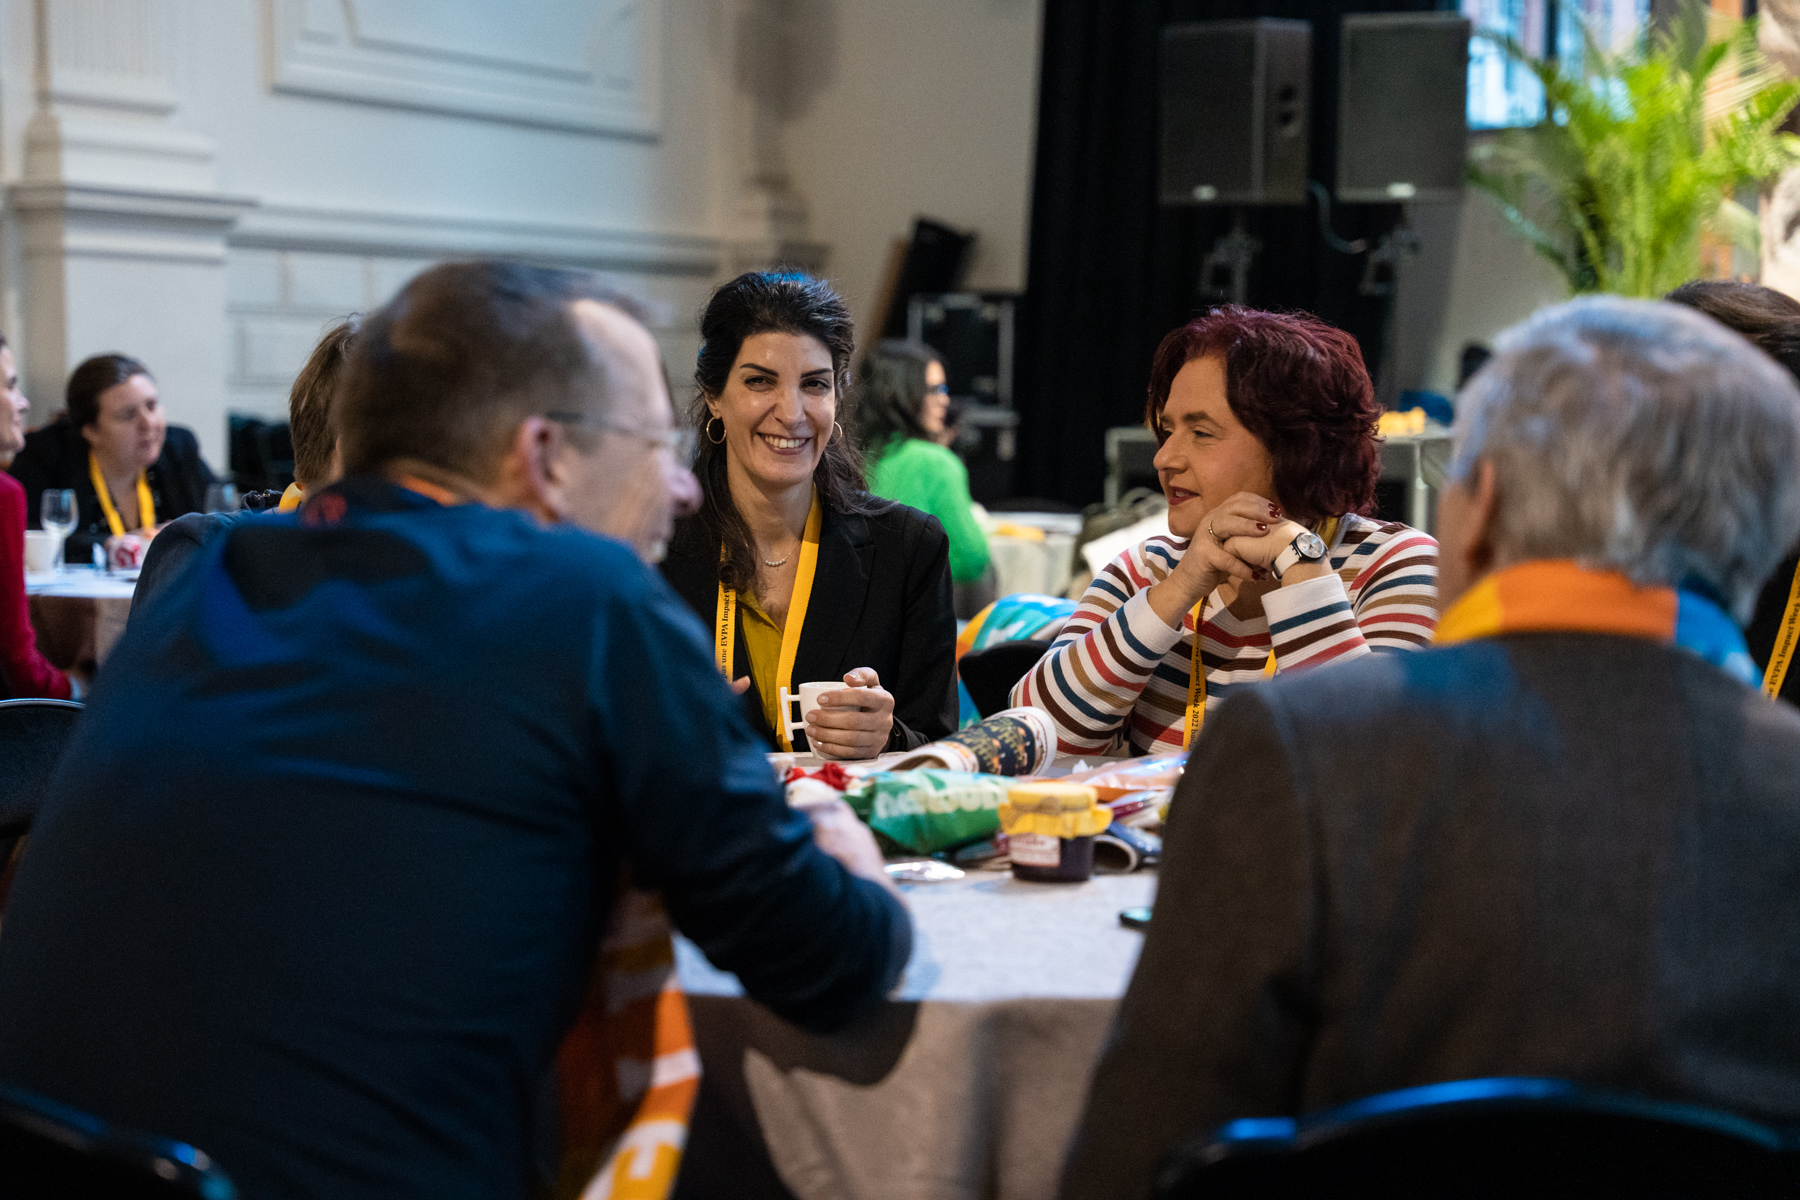 What makes a great conference to you?